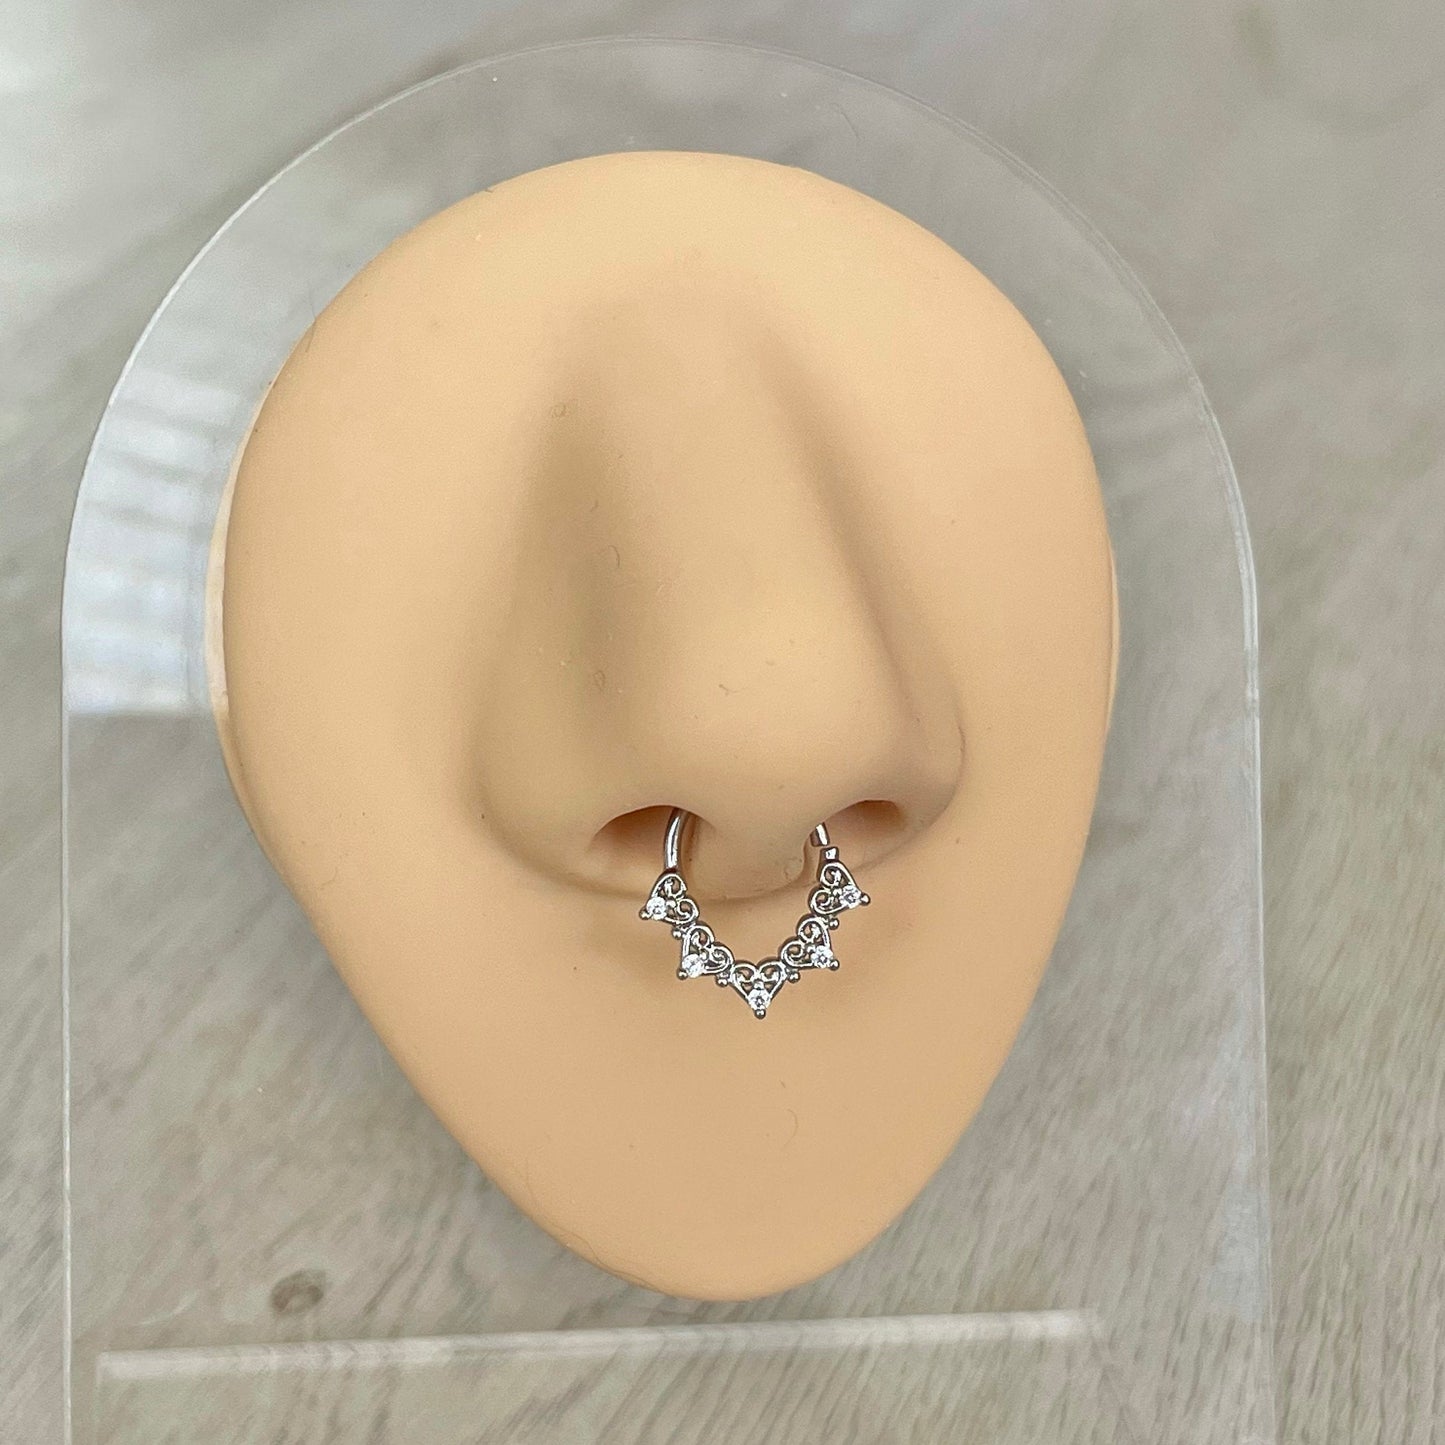 Minimalist Silver Bendable Septum Ring (16G | 8mm | Surgical Steel | Rose Gold, Silver, or Gold)